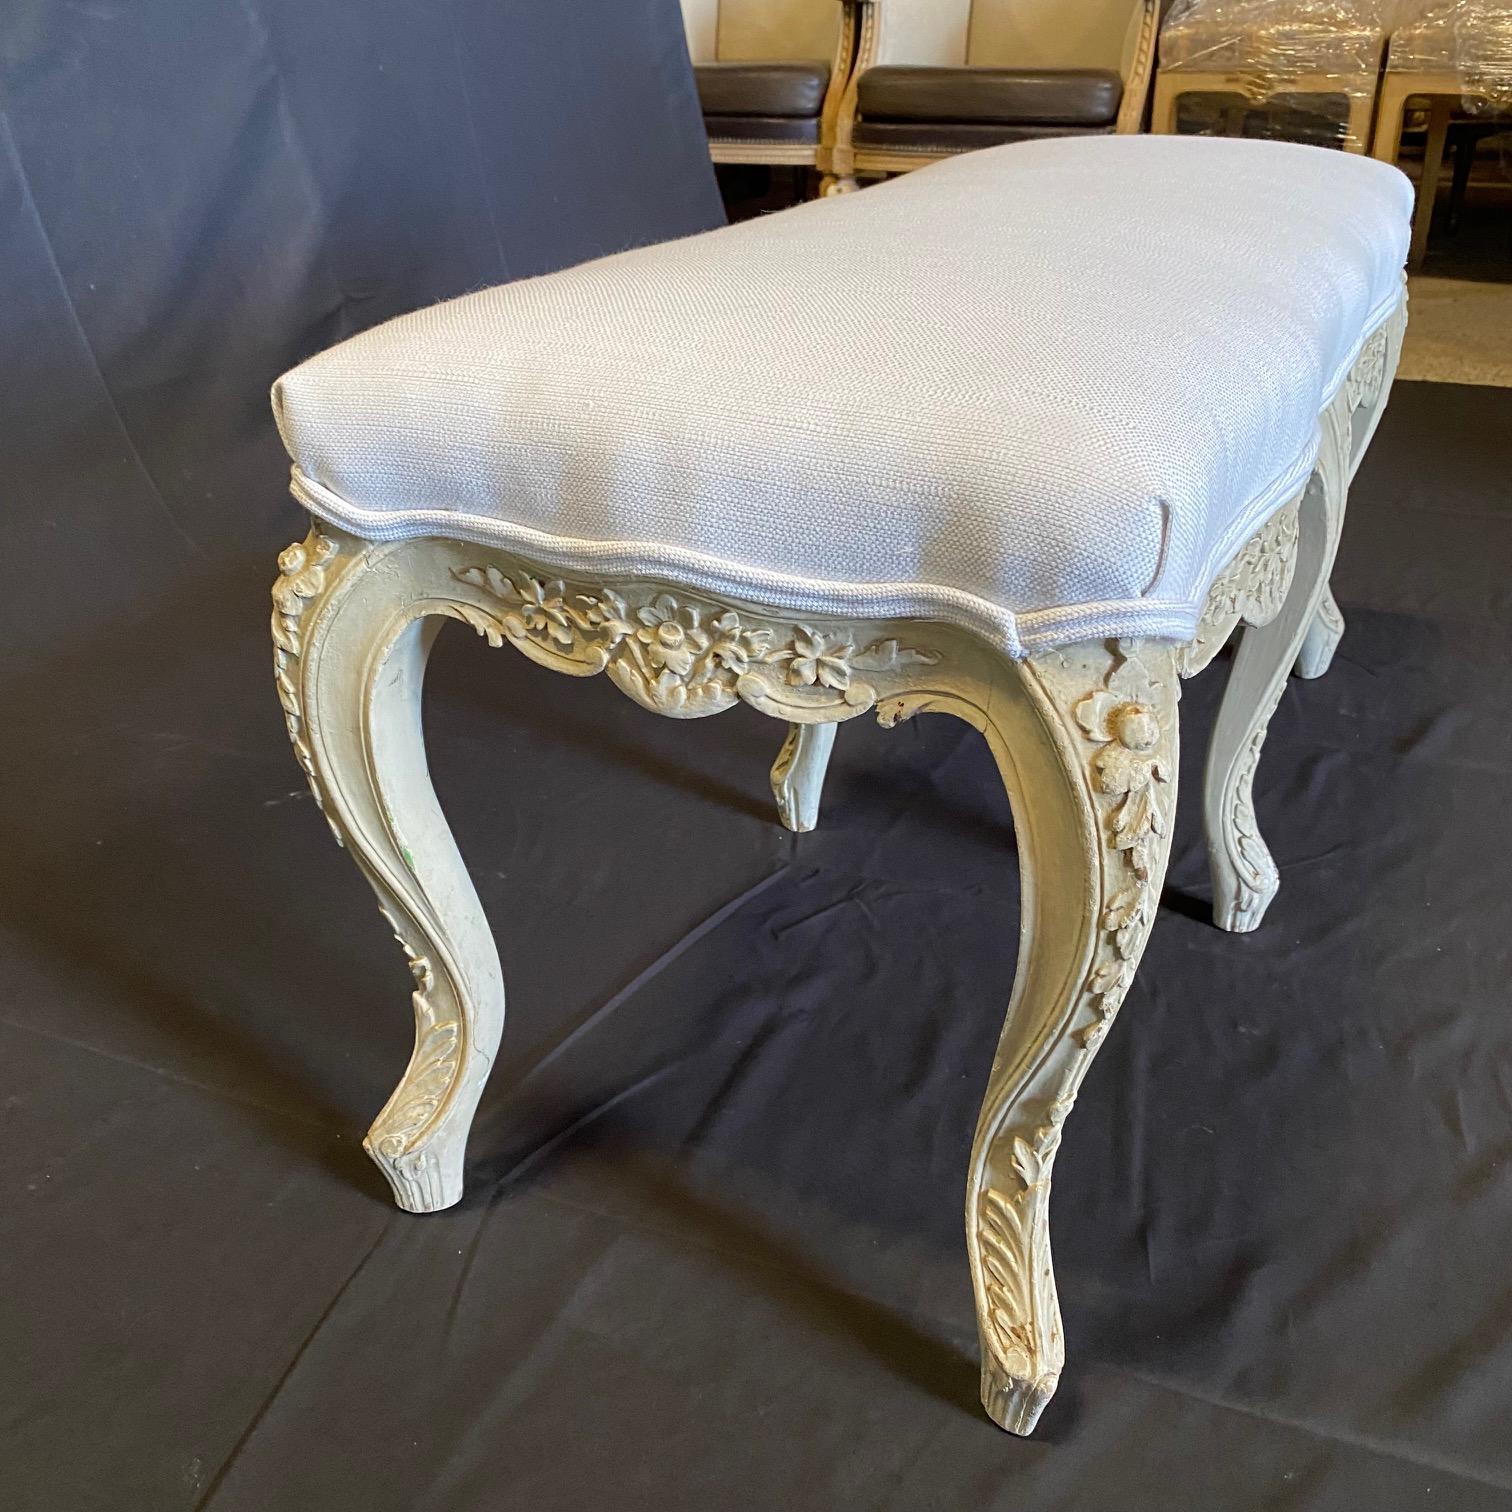 Bought in the South of France, this beautifully carved Louis XV bench retains its original lovely patinated pale white paint with a grayish patina. This elegant French Louis XV style carved bench or window bench is made of the highest quality, and